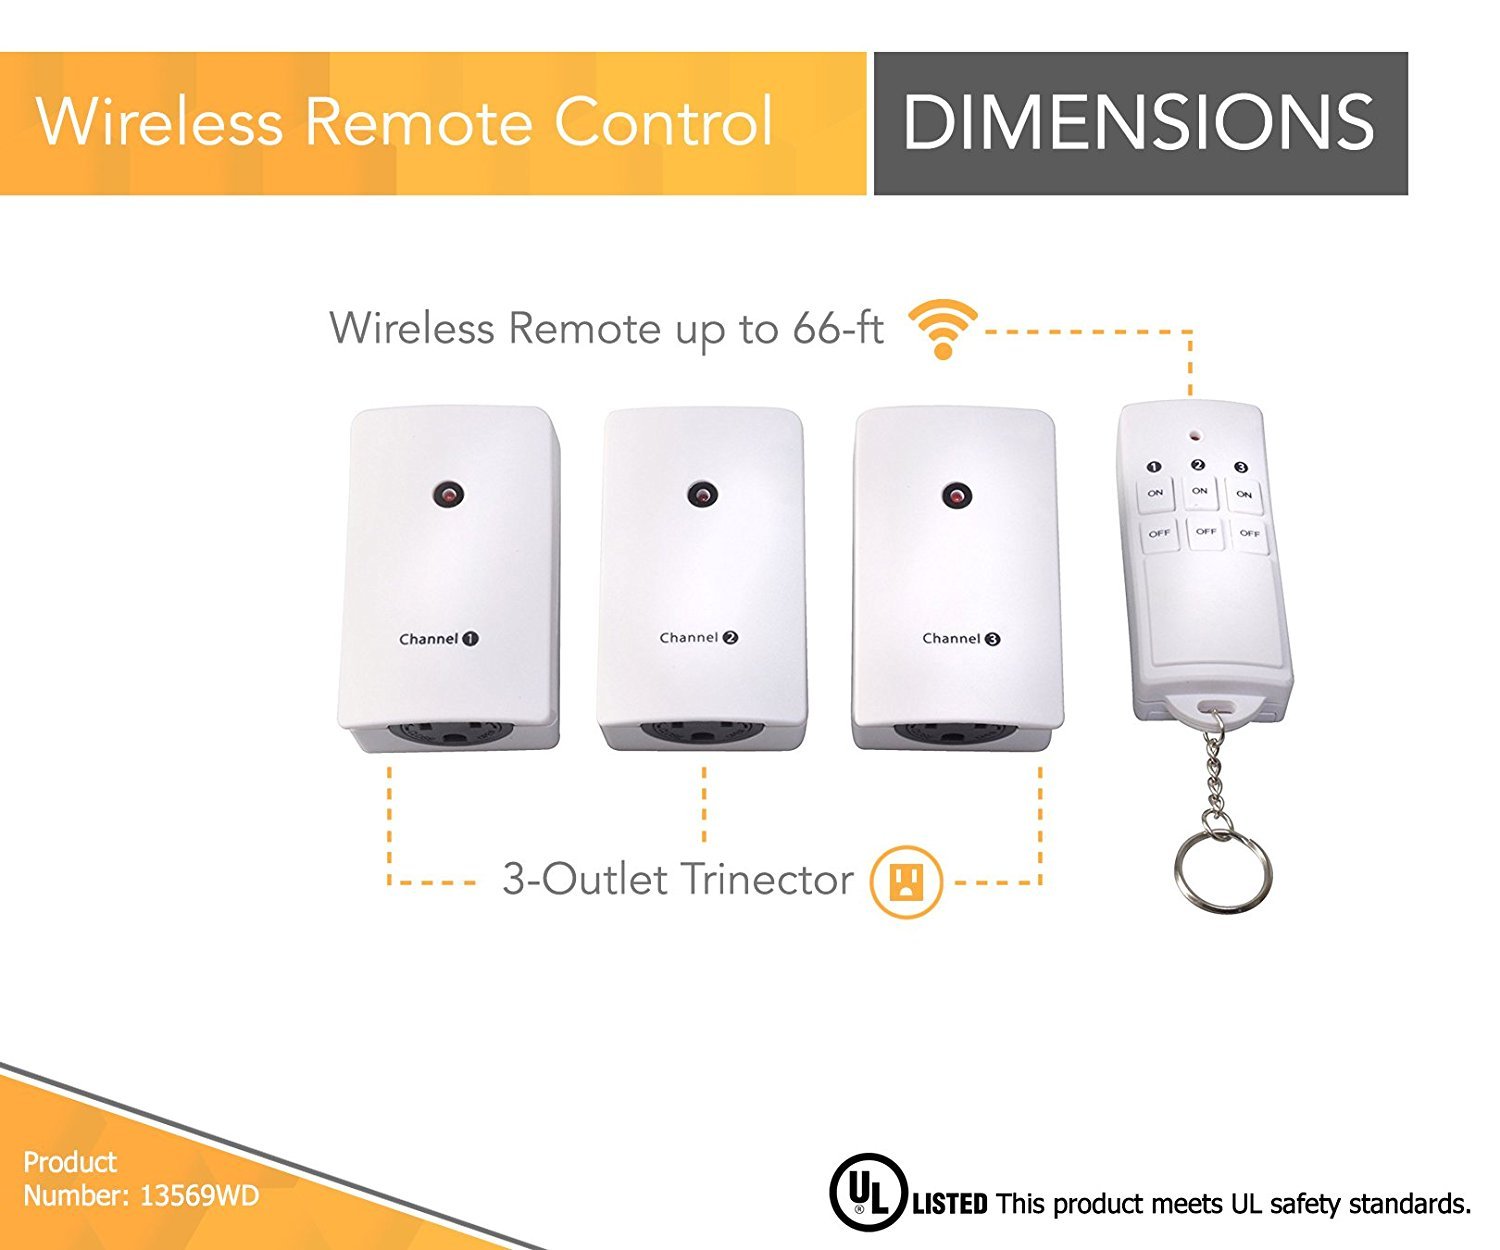 Woods Indoor Wireless Remote Control with 3 Outlets, White, 3-Pack - image 5 of 10